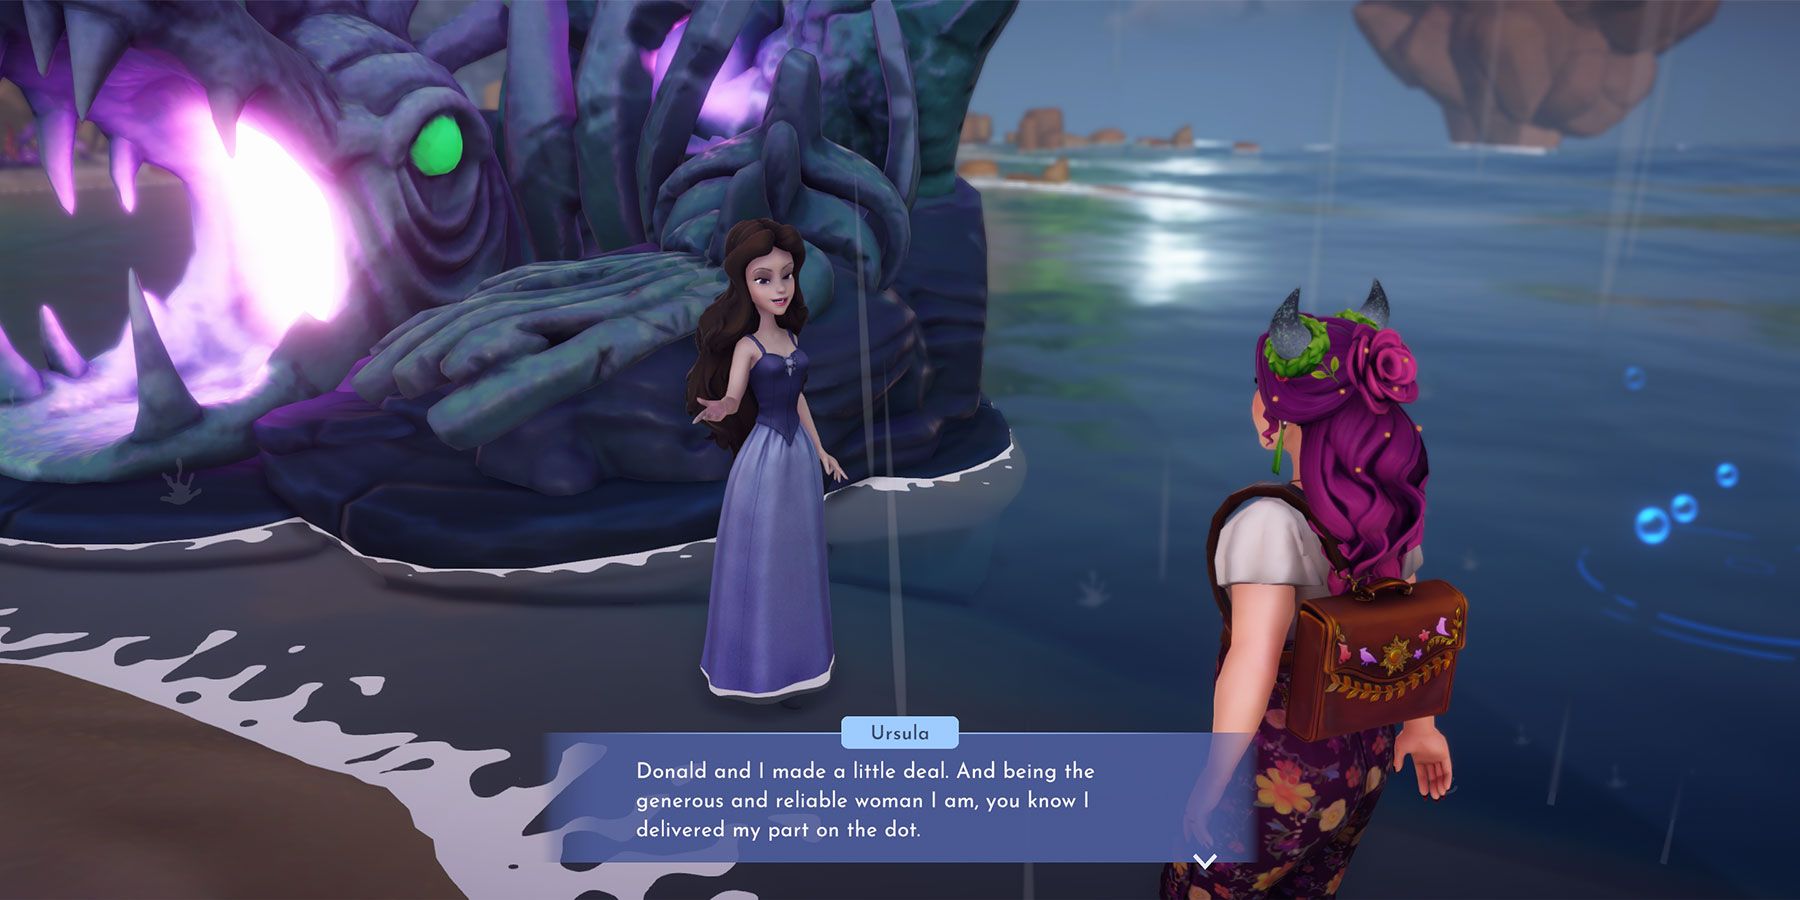 Deal of the Day: The Gift quest with Vanessa in Disney Dreamlight Valley.